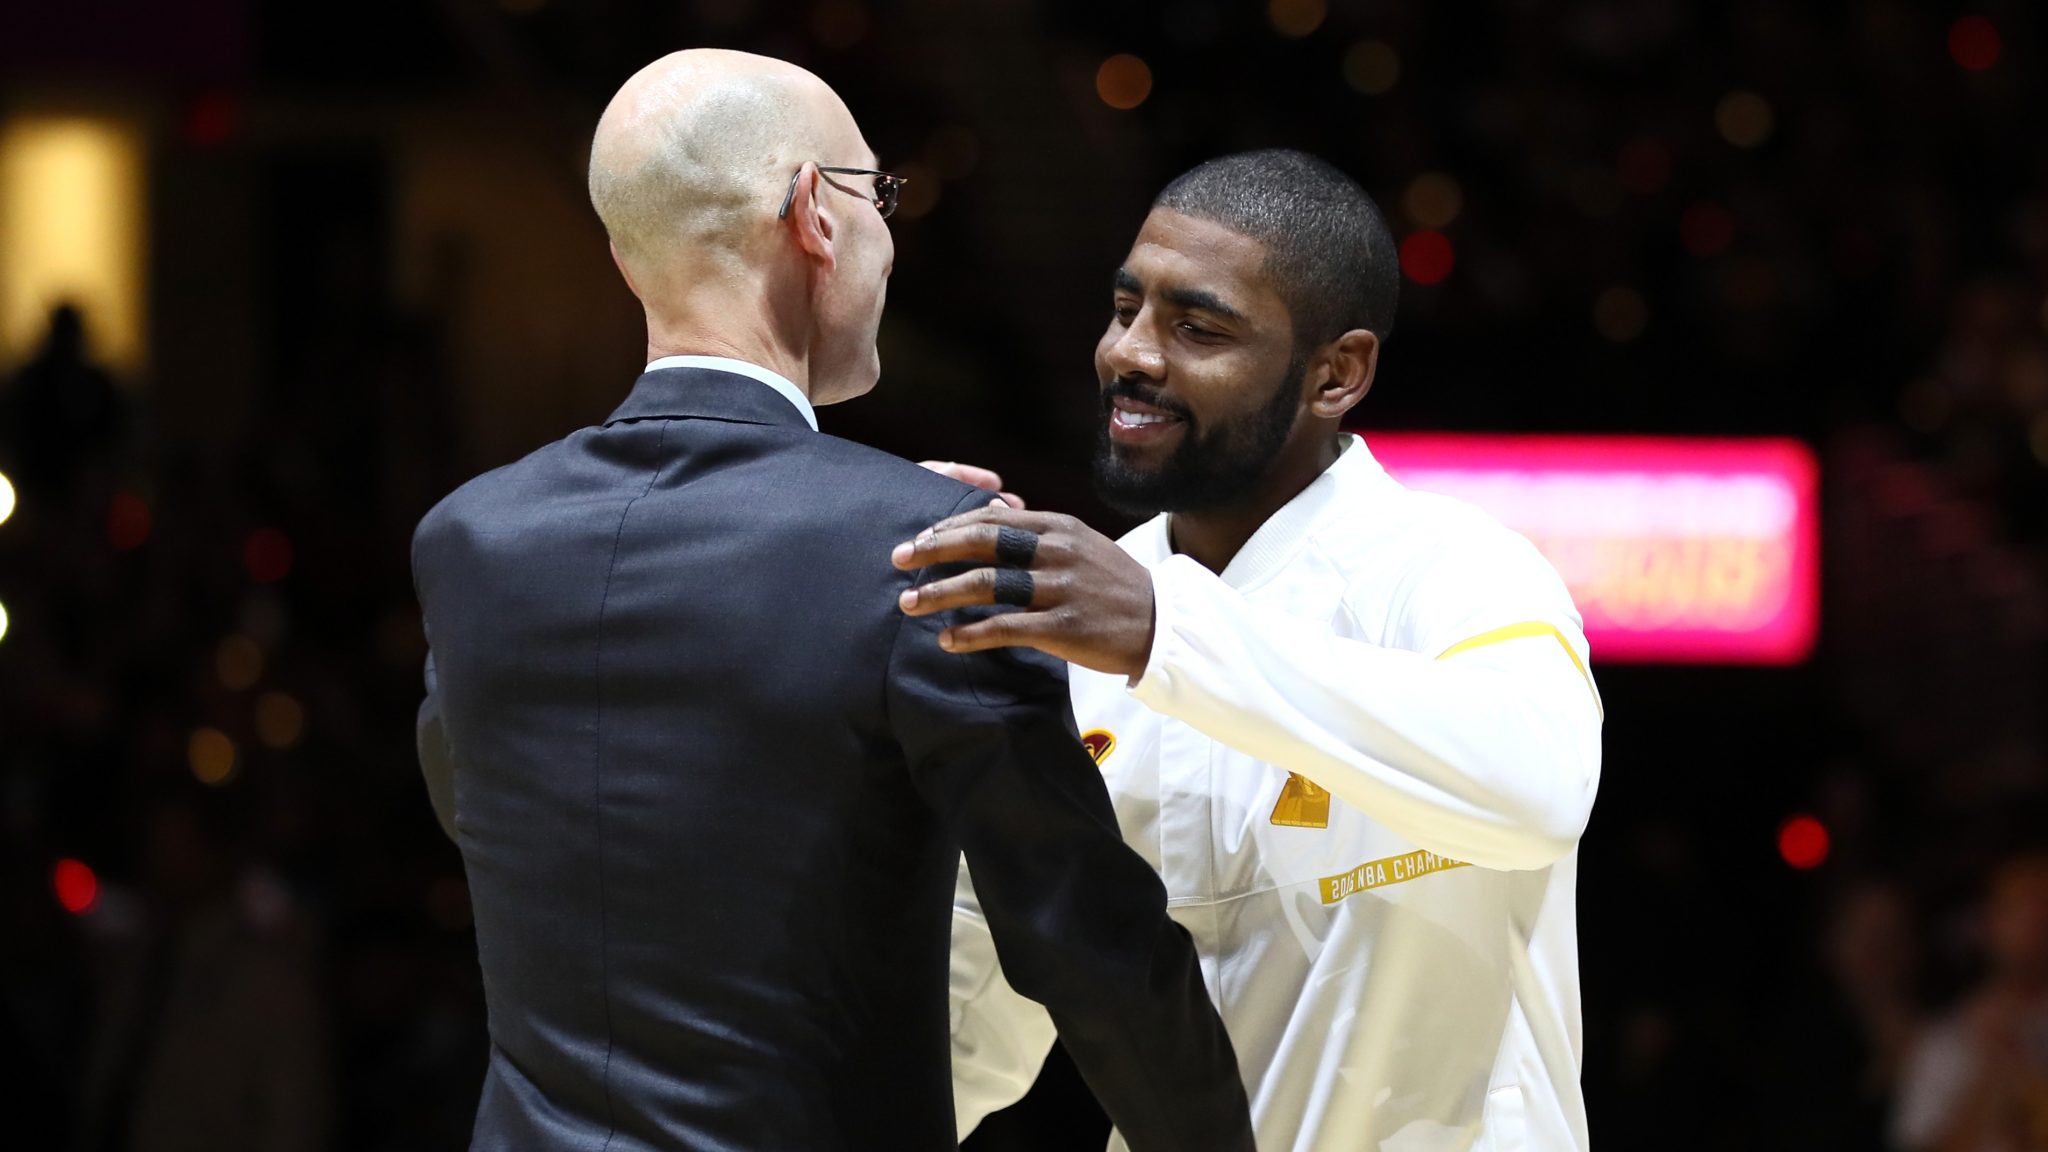 Adam Silver Hits Back at Claims That Kyrie Irving Situation is ‘Unfair’